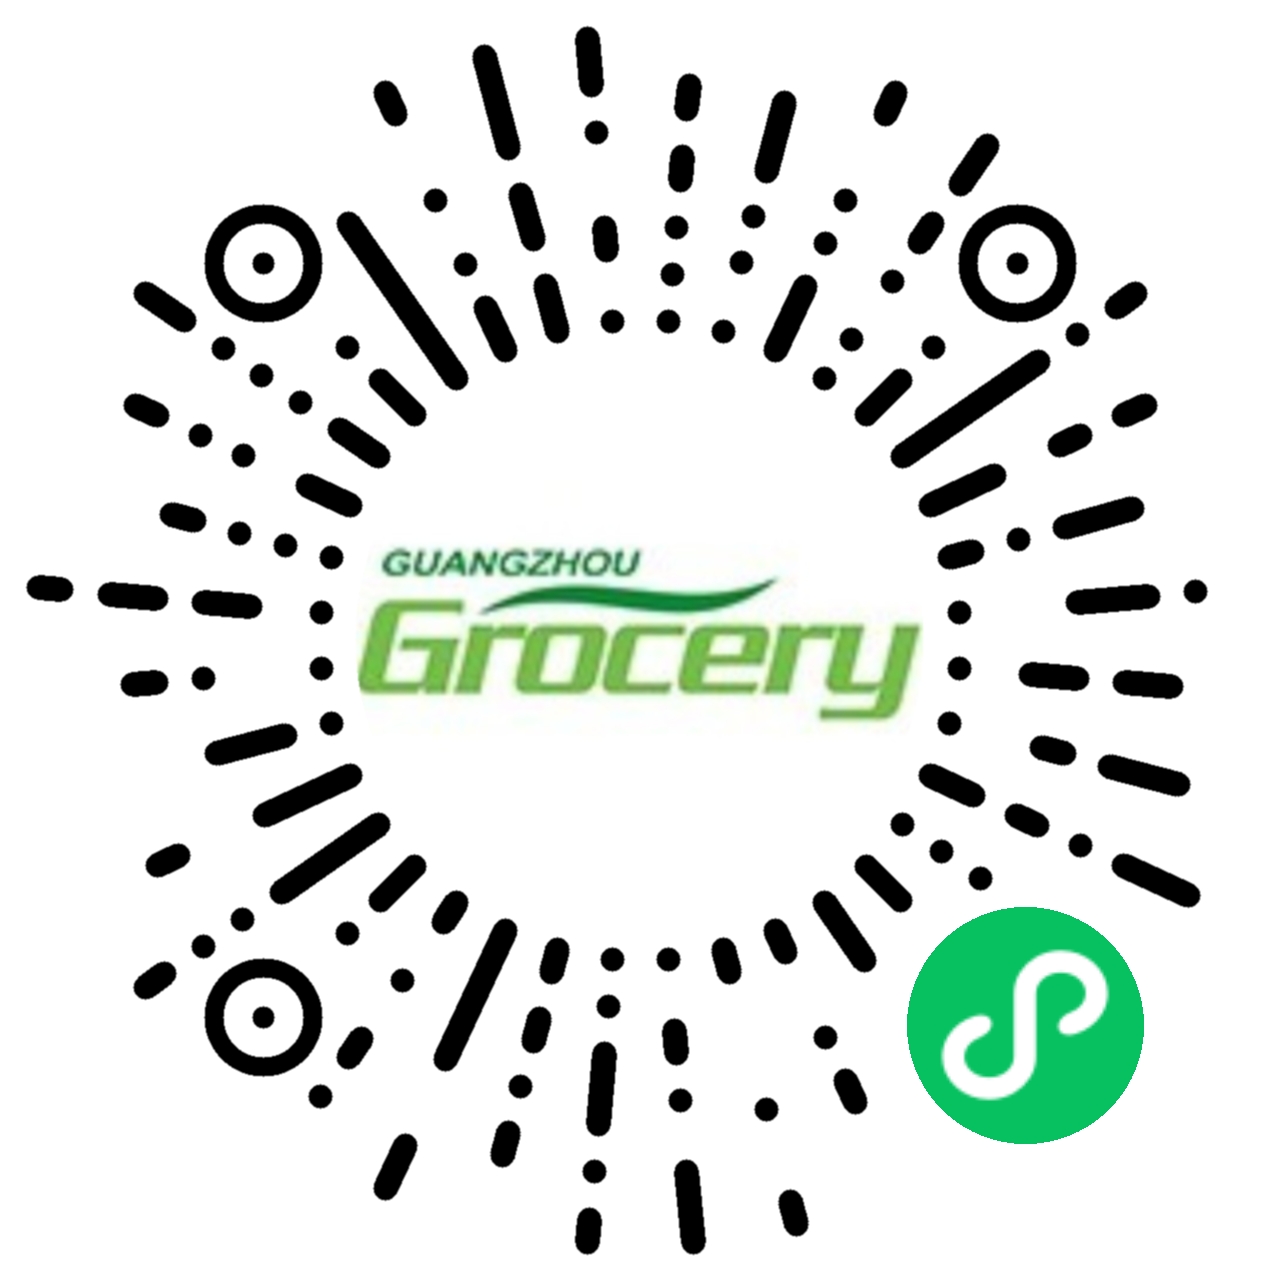 GV Supplements - Guangzhou Grocery